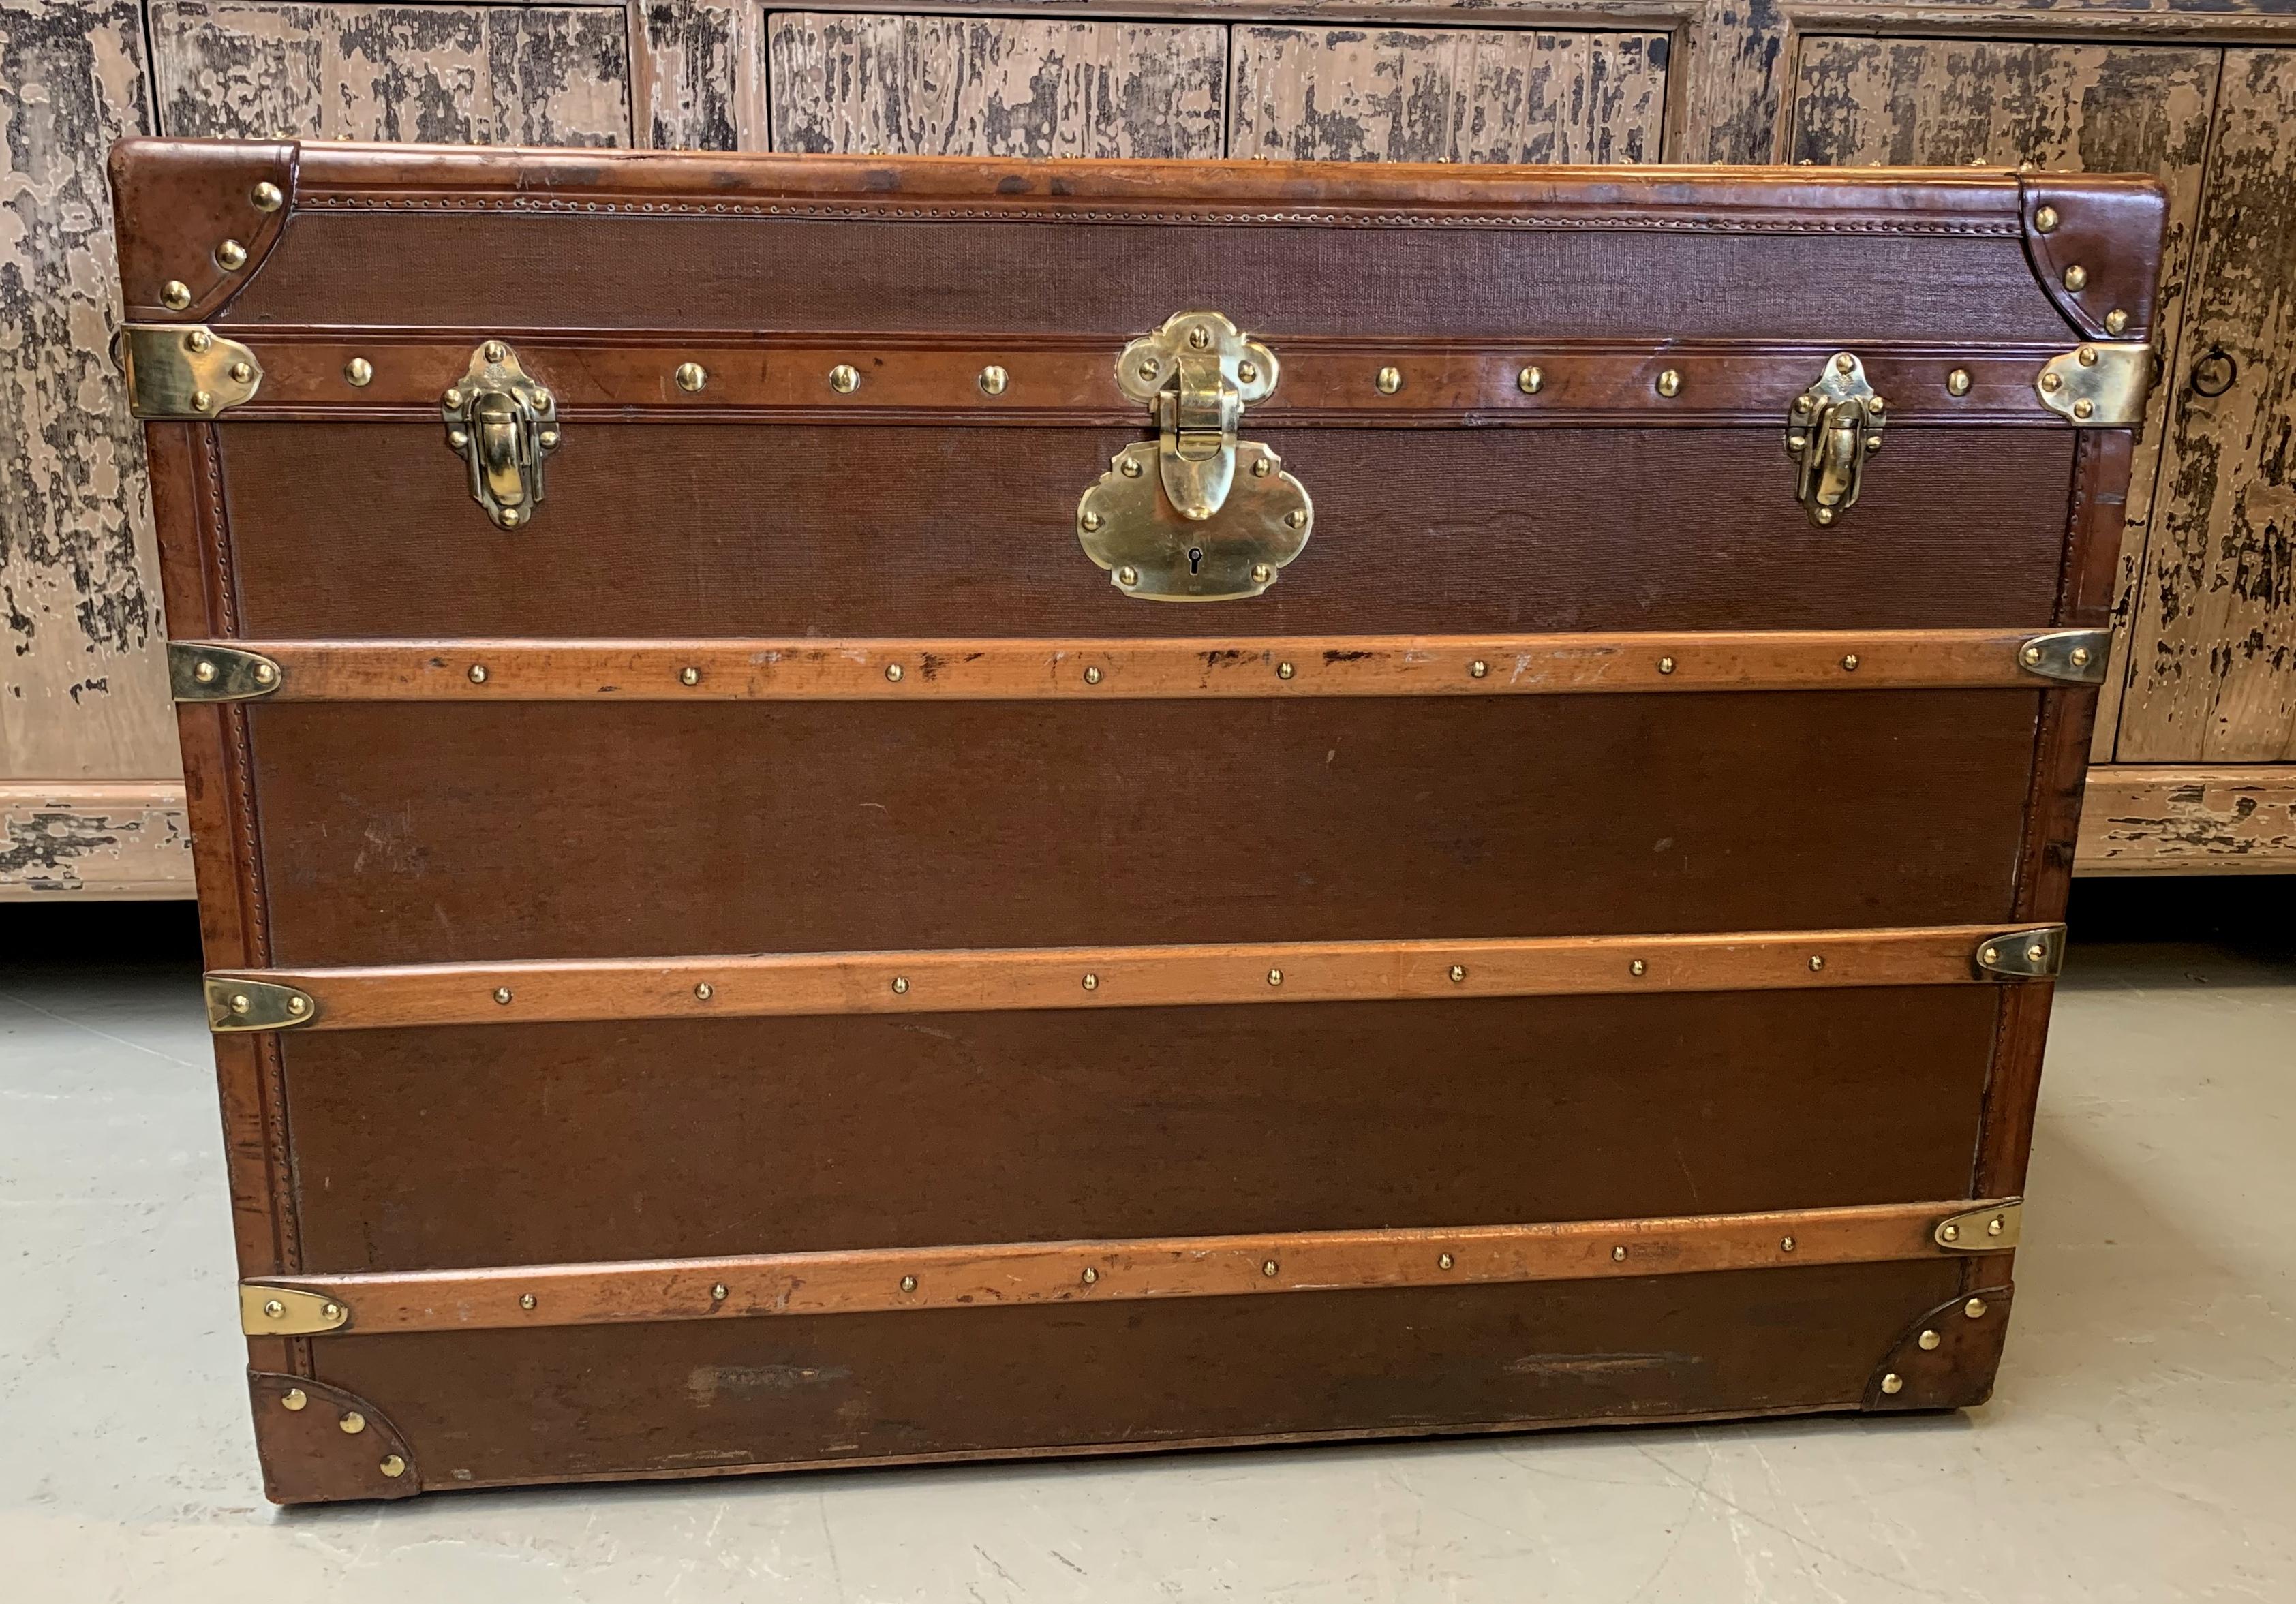 A very nice steamer trunk with weels. In good shape made from brown canvas, brown color lozine trim, large leather side handles and brass corners and locks.
The brass parts in combination with the brown leather makes it a luxury piece for your